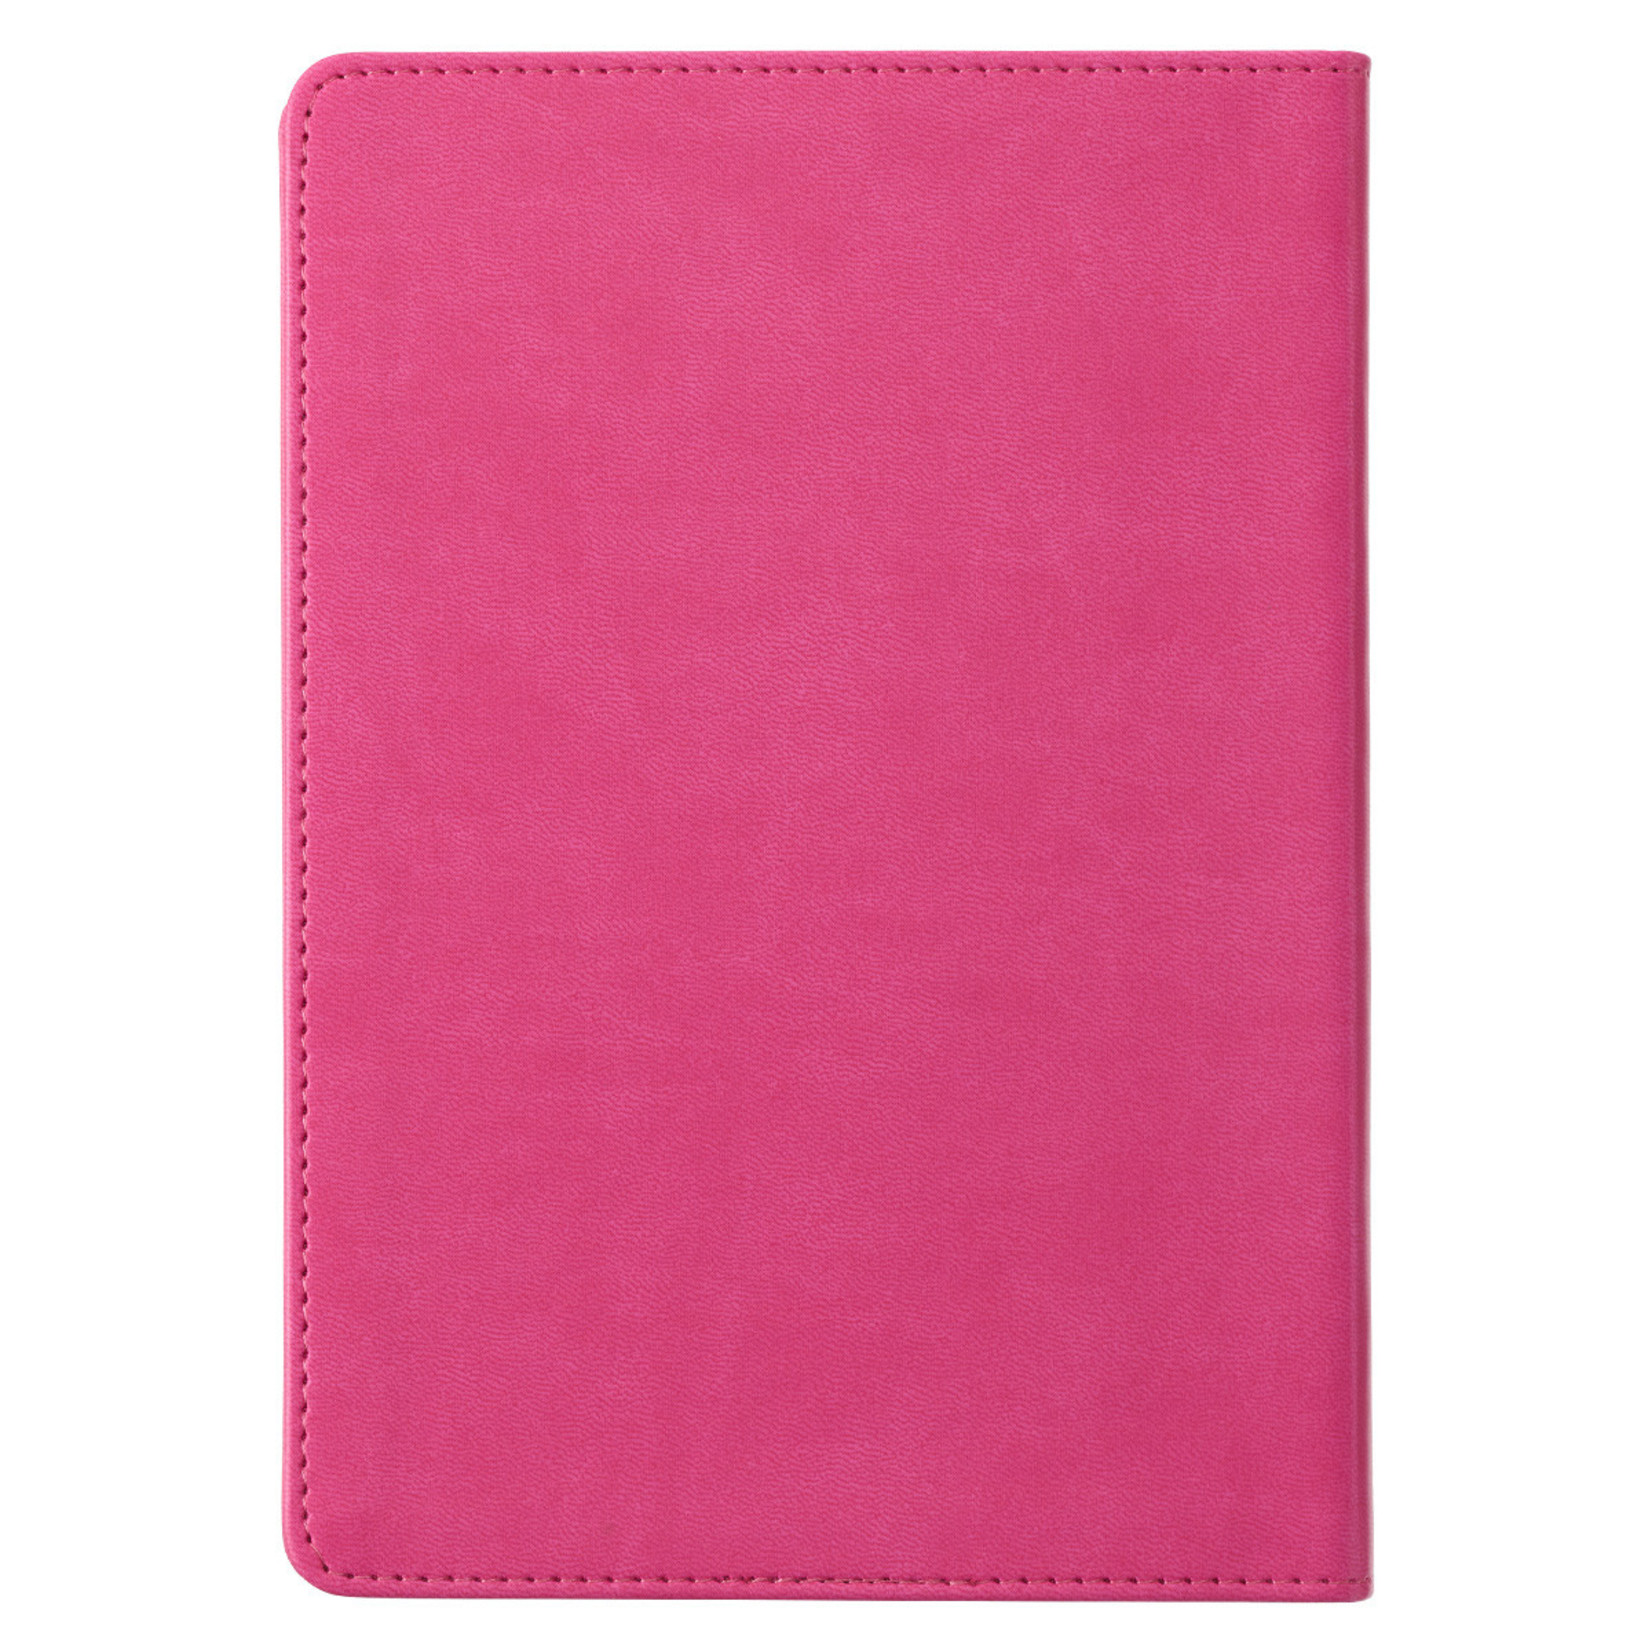 Christian Art Gifts Grateful Heart Pink Faux Leather Classic Journal